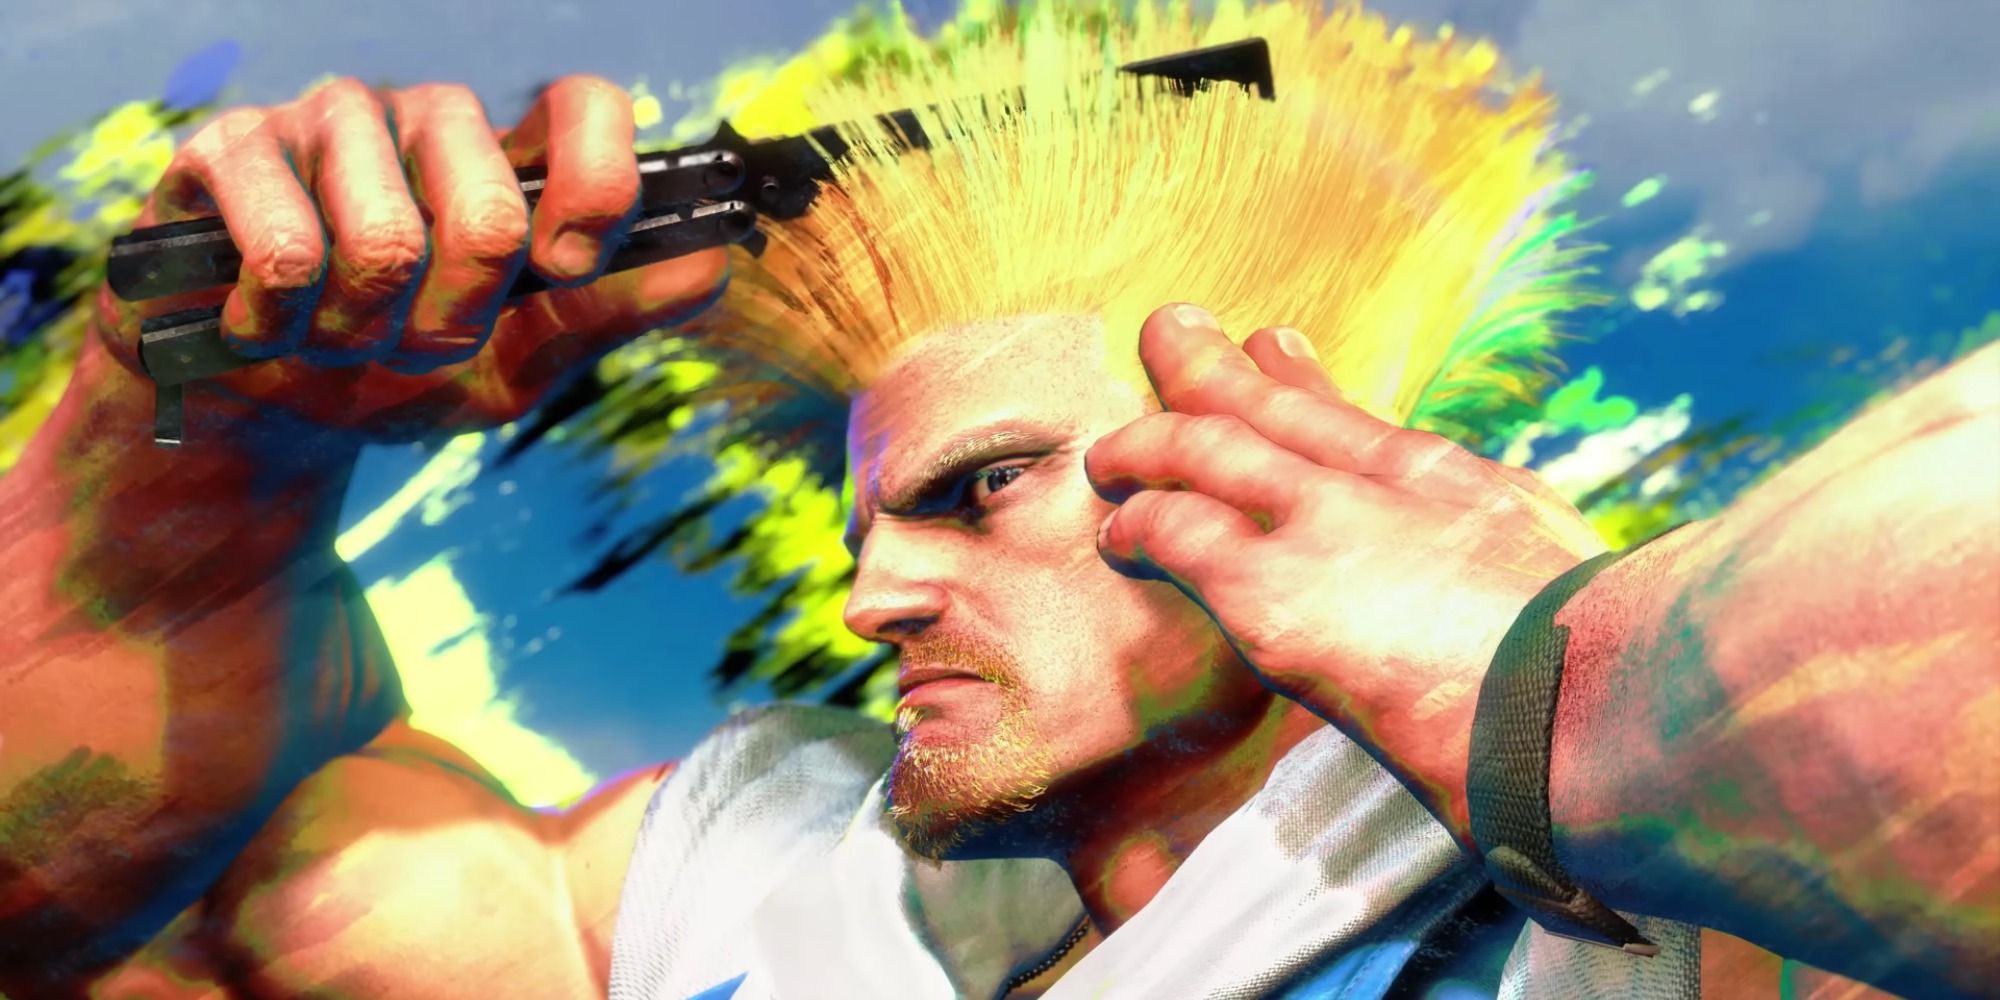 Guile combing his hair during his victory screen in Street Fighter 6